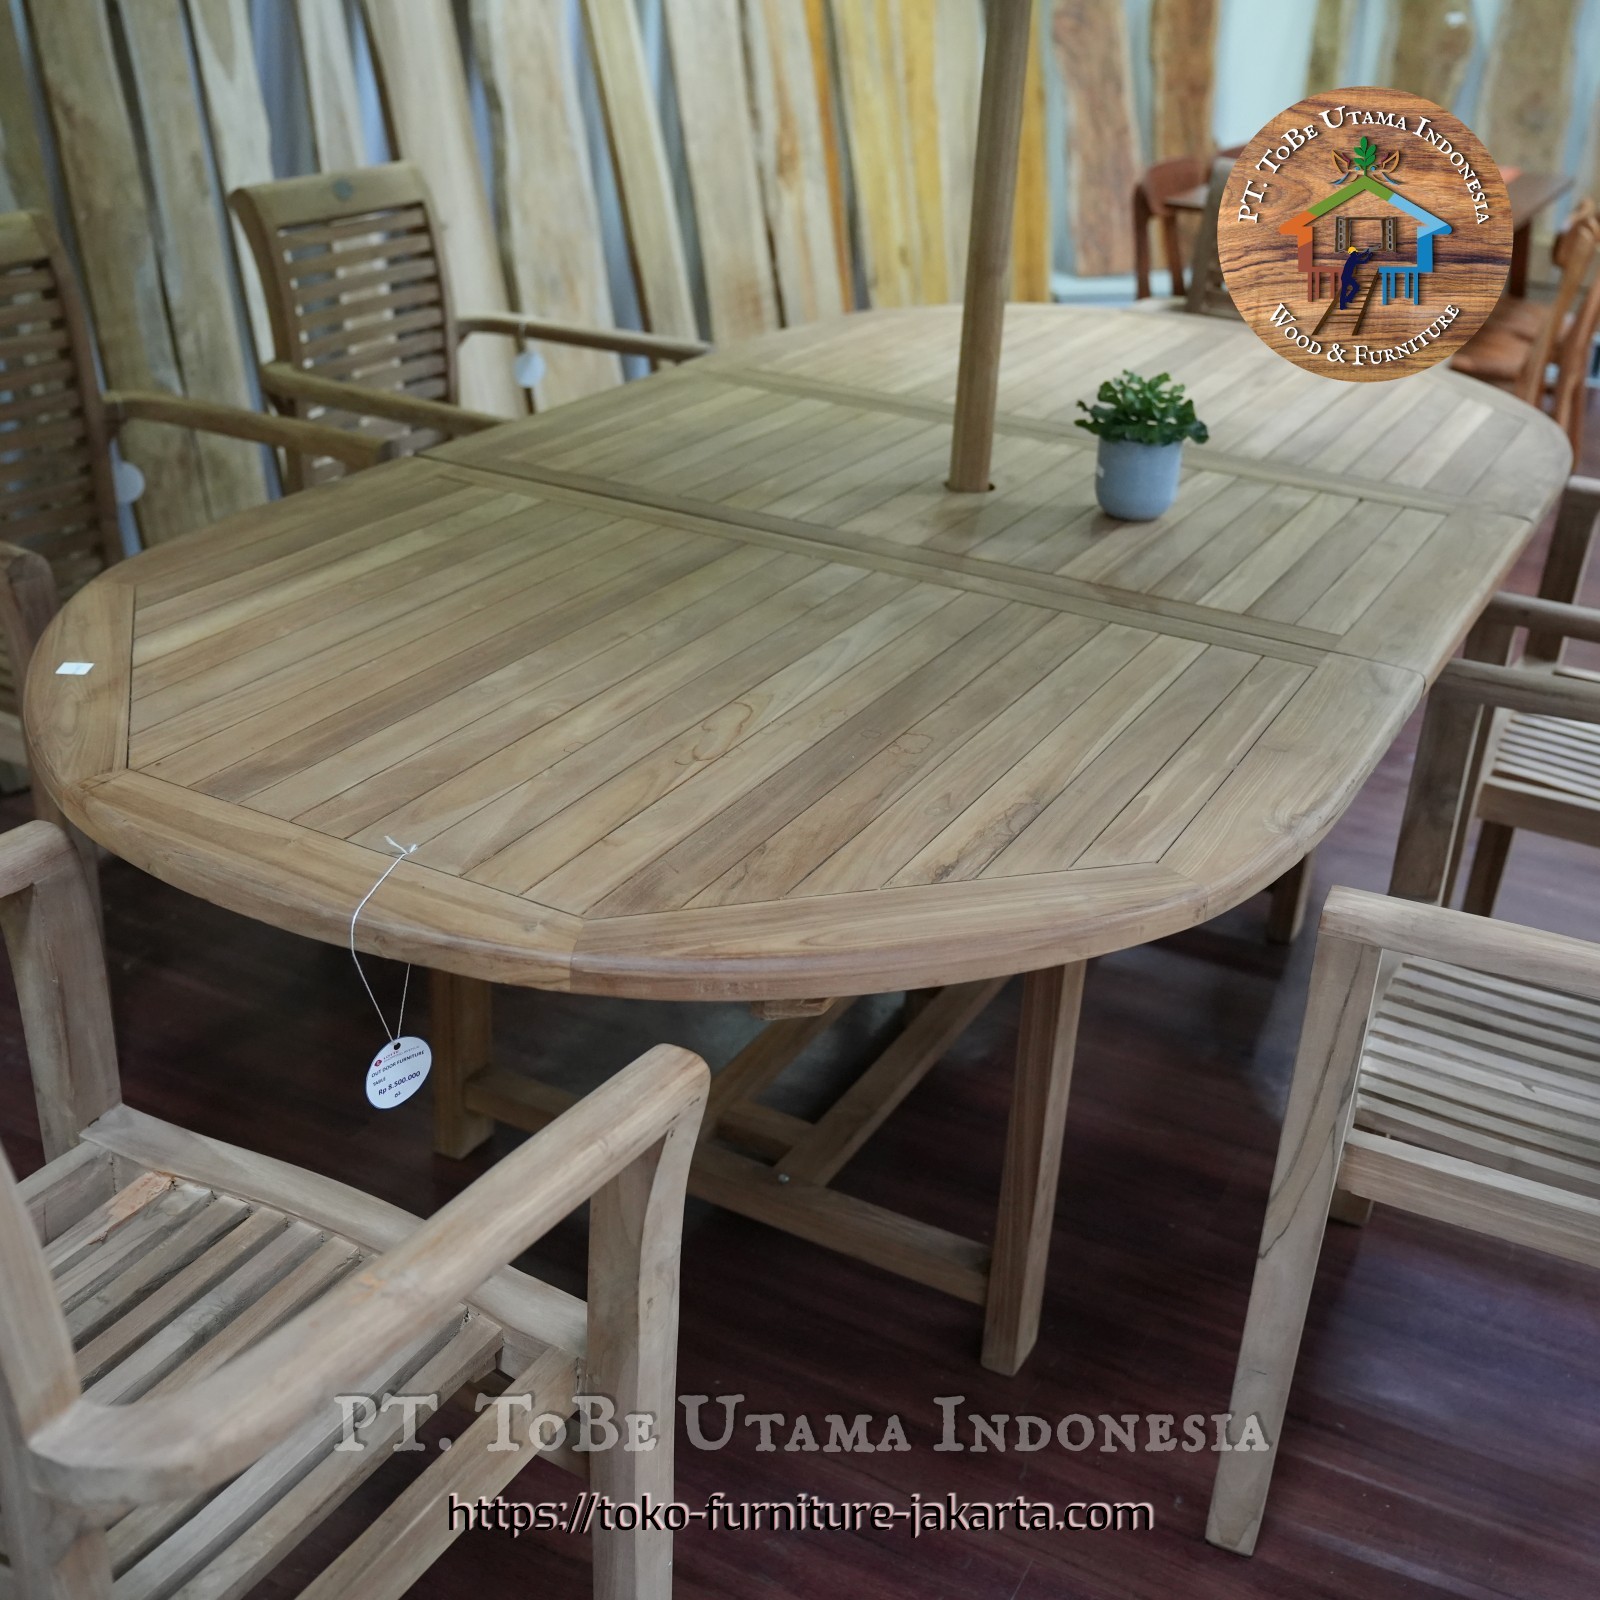 Terrace Tables: Teak Dining Table Oval for the Terrace or Garden made of teakwood (image 1 of 6).